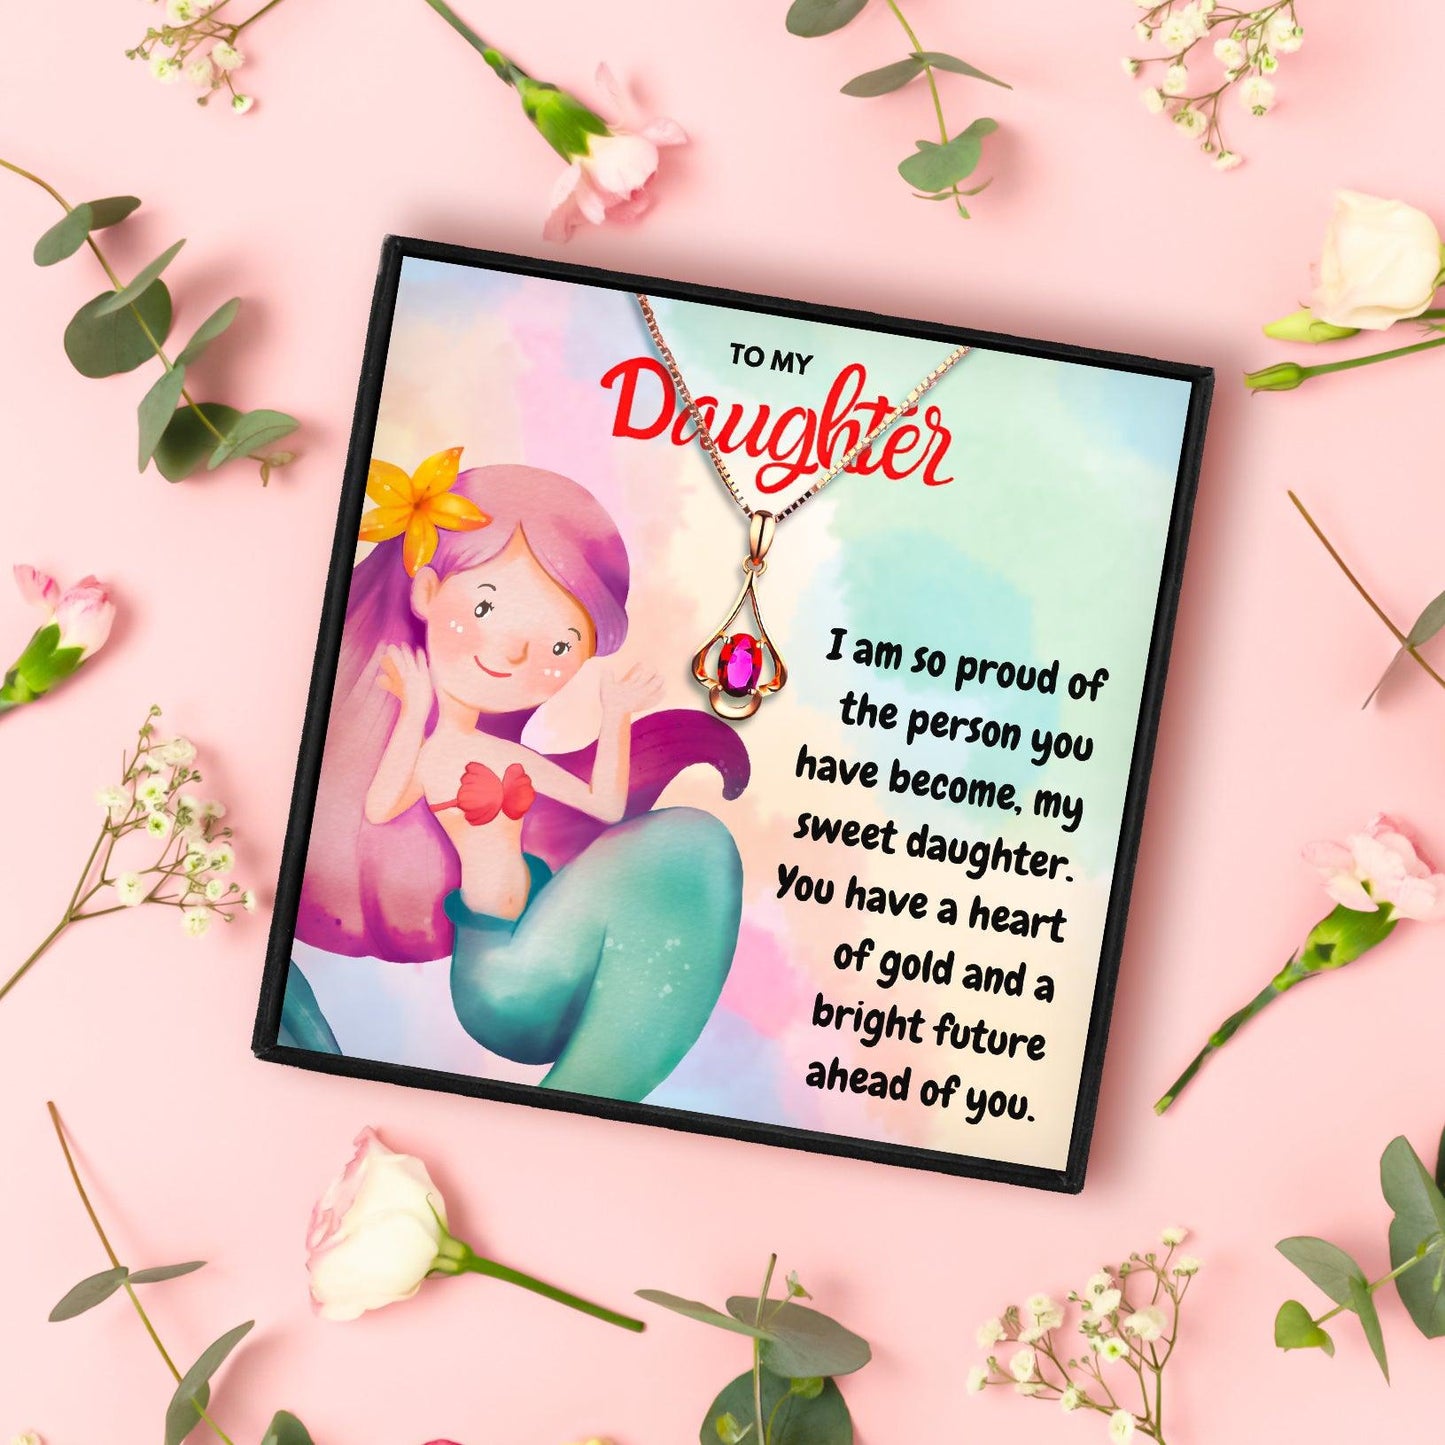 Daughter Necklace Message Card Gift From Mom & Dad in 2023 | Daughter Necklace Message Card Gift From Mom & Dad - undefined | For My Daughter necklace, Meaningful Daughter Necklaces, Mother Daughter Necklace, To my daughter necklace, To Our Daughter necklace | From Hunny Life | hunnylife.com